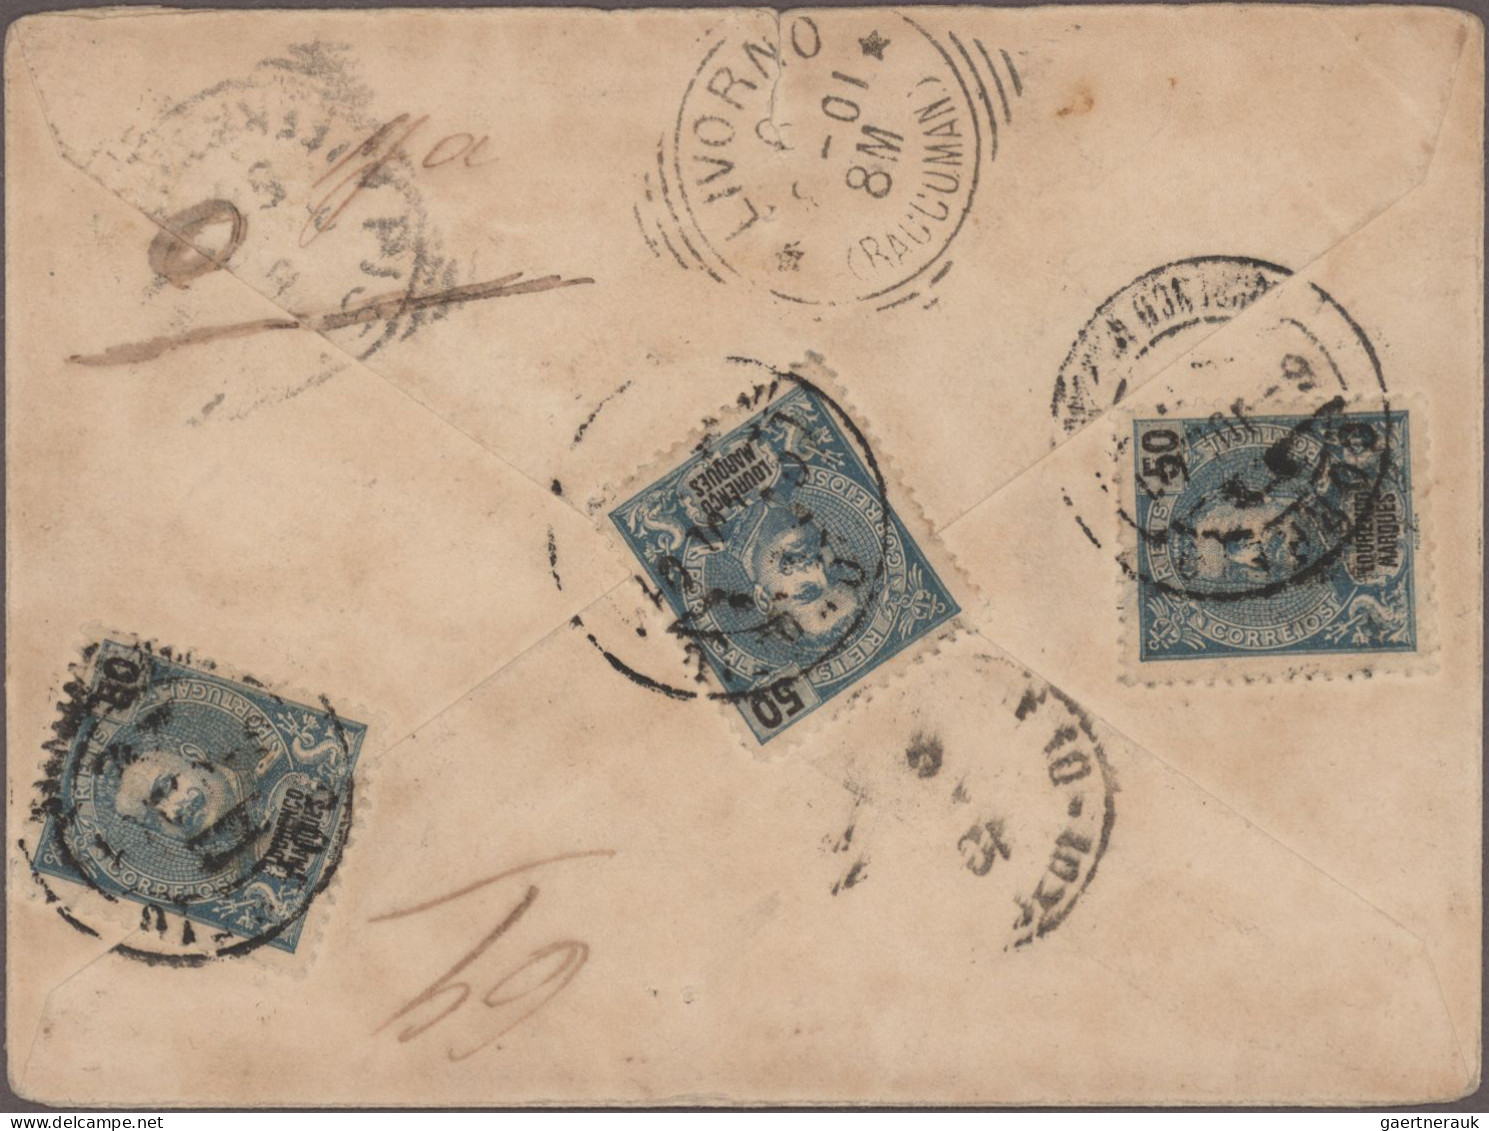 Ship mail: 1842-1910's SHIP MAIL & SHIPS: Collection of 39 covers, postcards, po